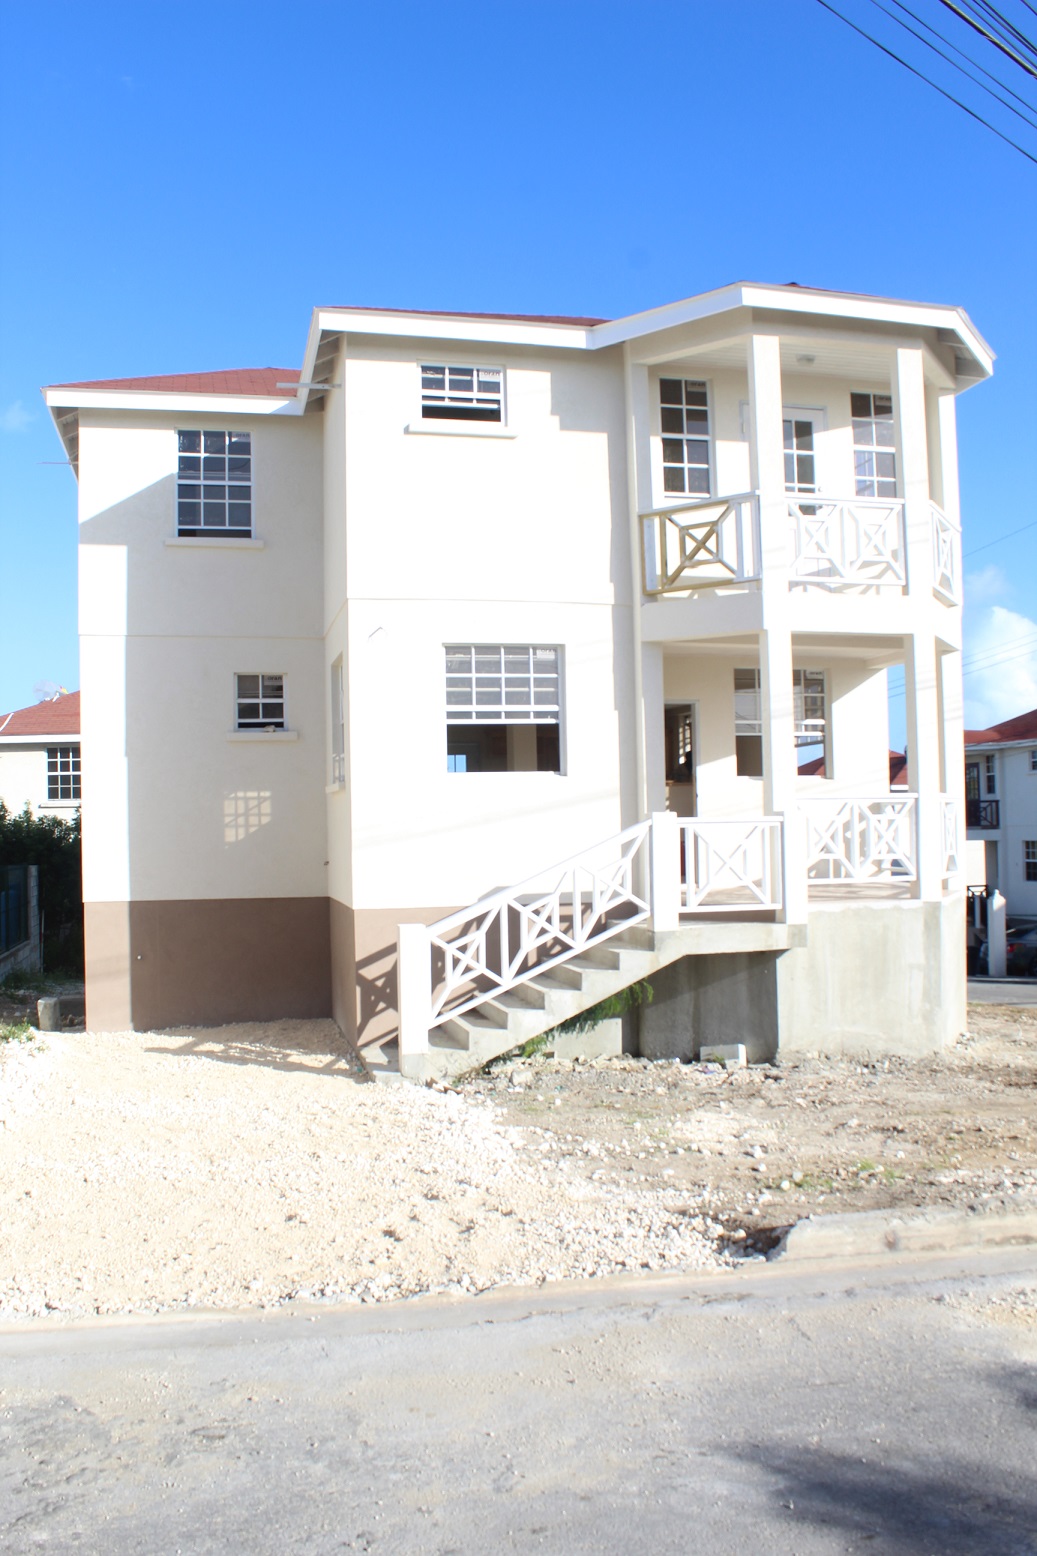 Lowthers Park No. 19A, Lowthers, Christ Church Barbados